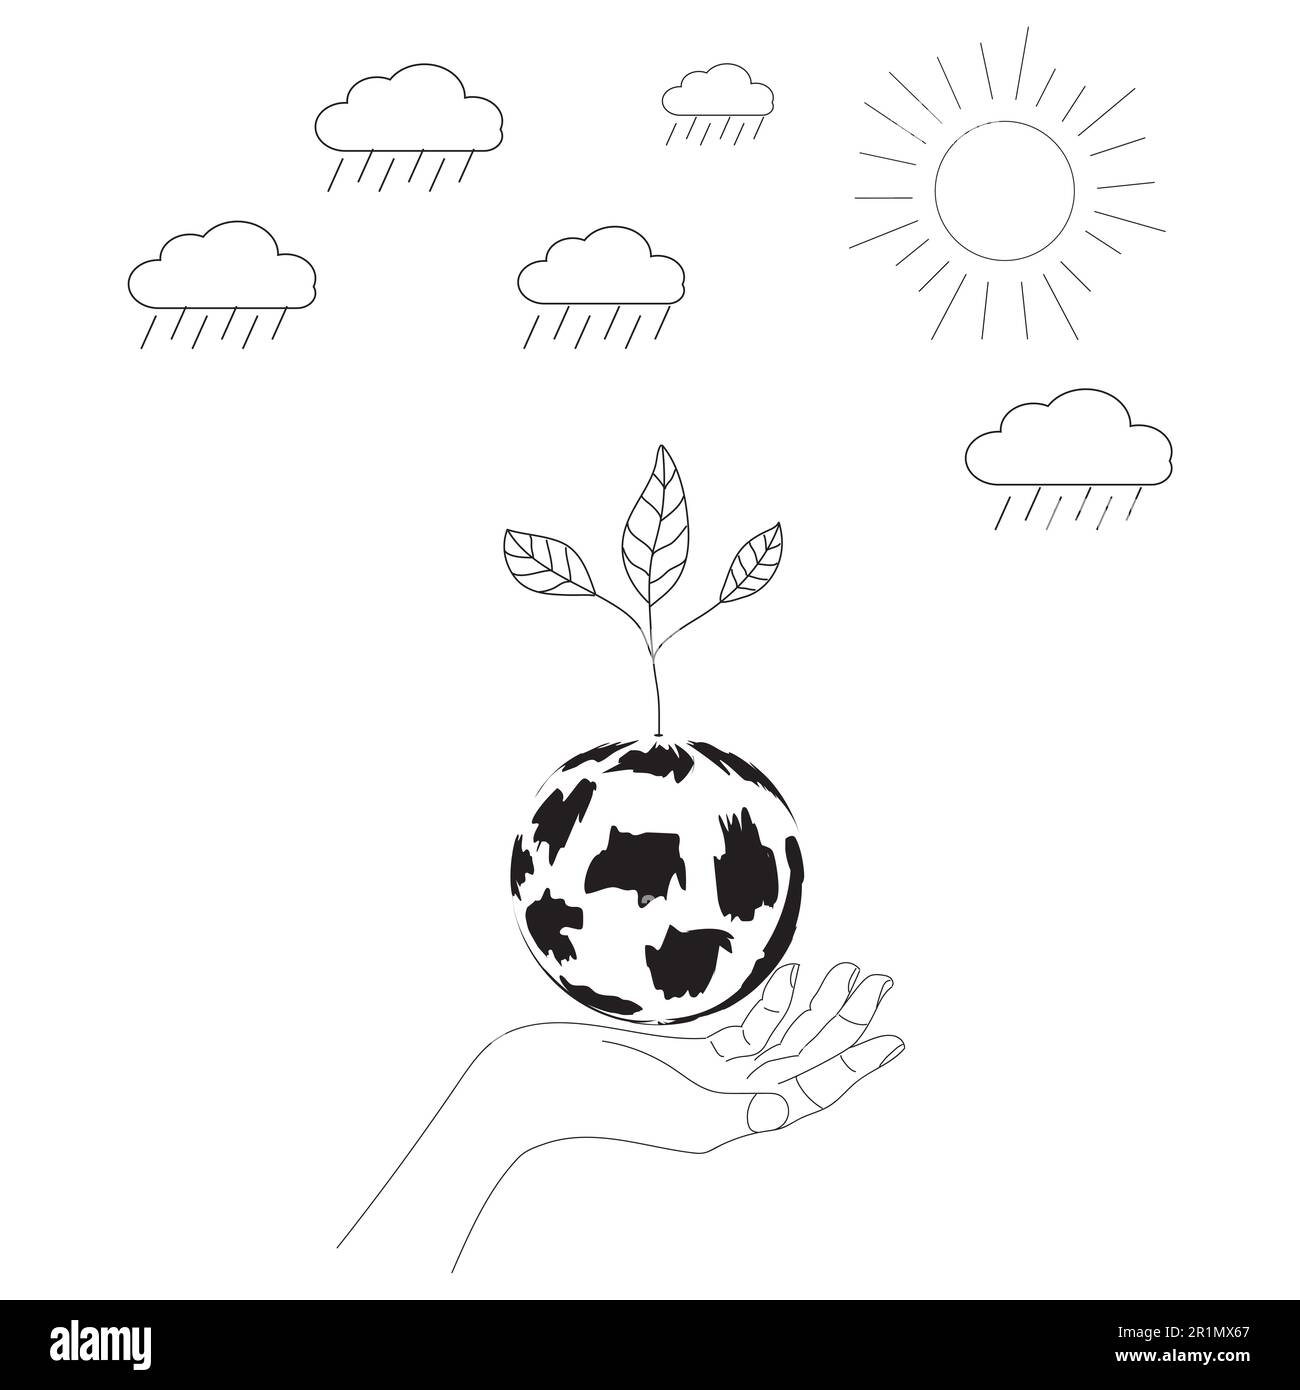 hands human holding the earth globe with tree, sun, rain cloud, line or doodle, hand drawing black and white, earth planet ecology of world environmen Stock Photo